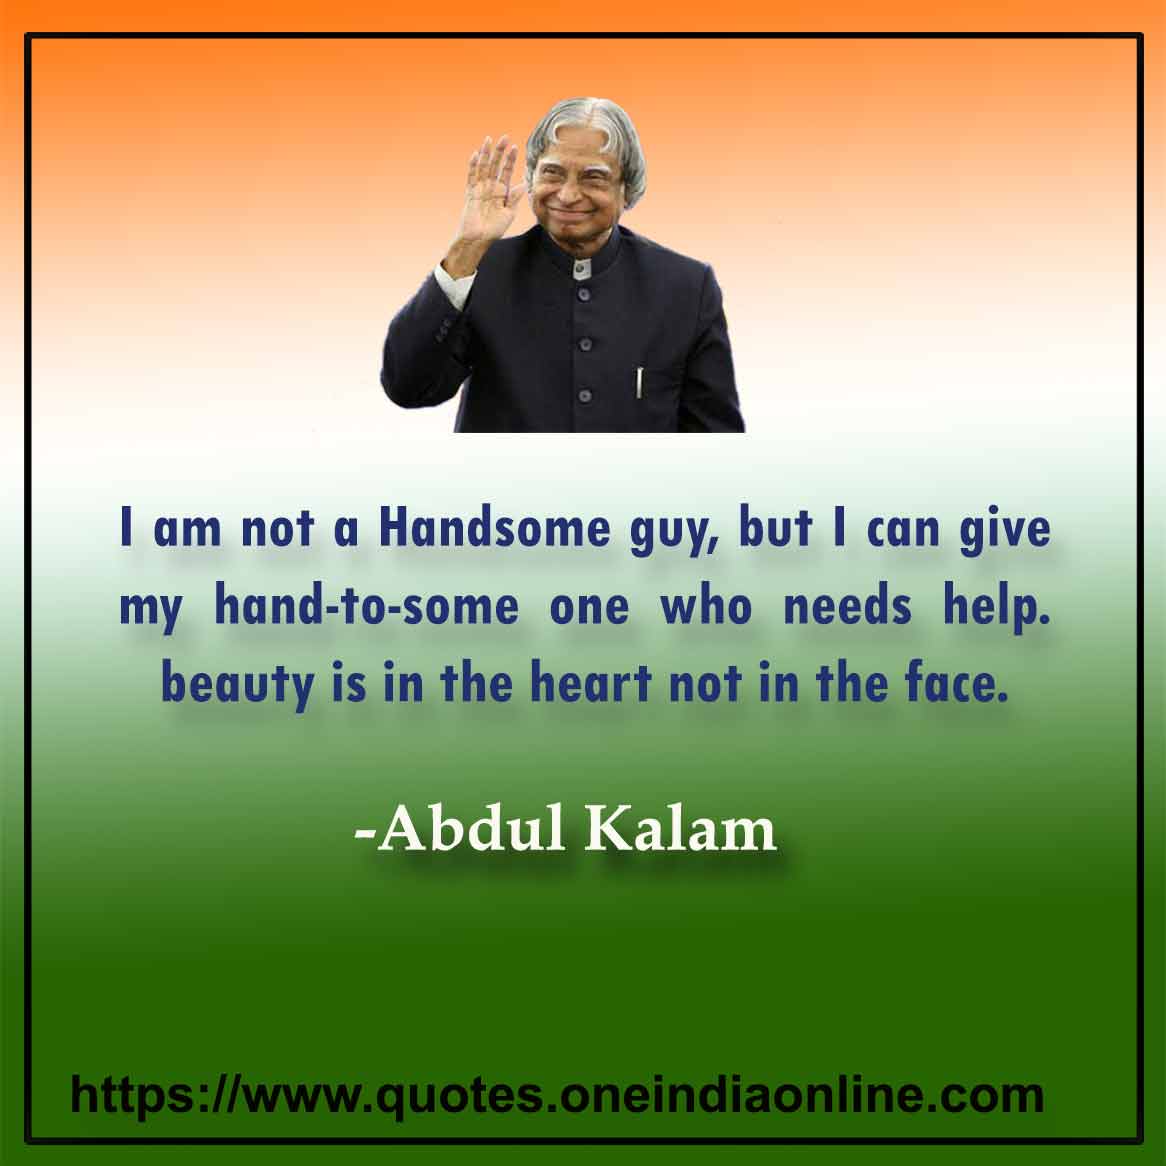 I am not a Handsome guy, but I can give my hand-to-some one who needs help. Beauty is in the heart not in the face.

